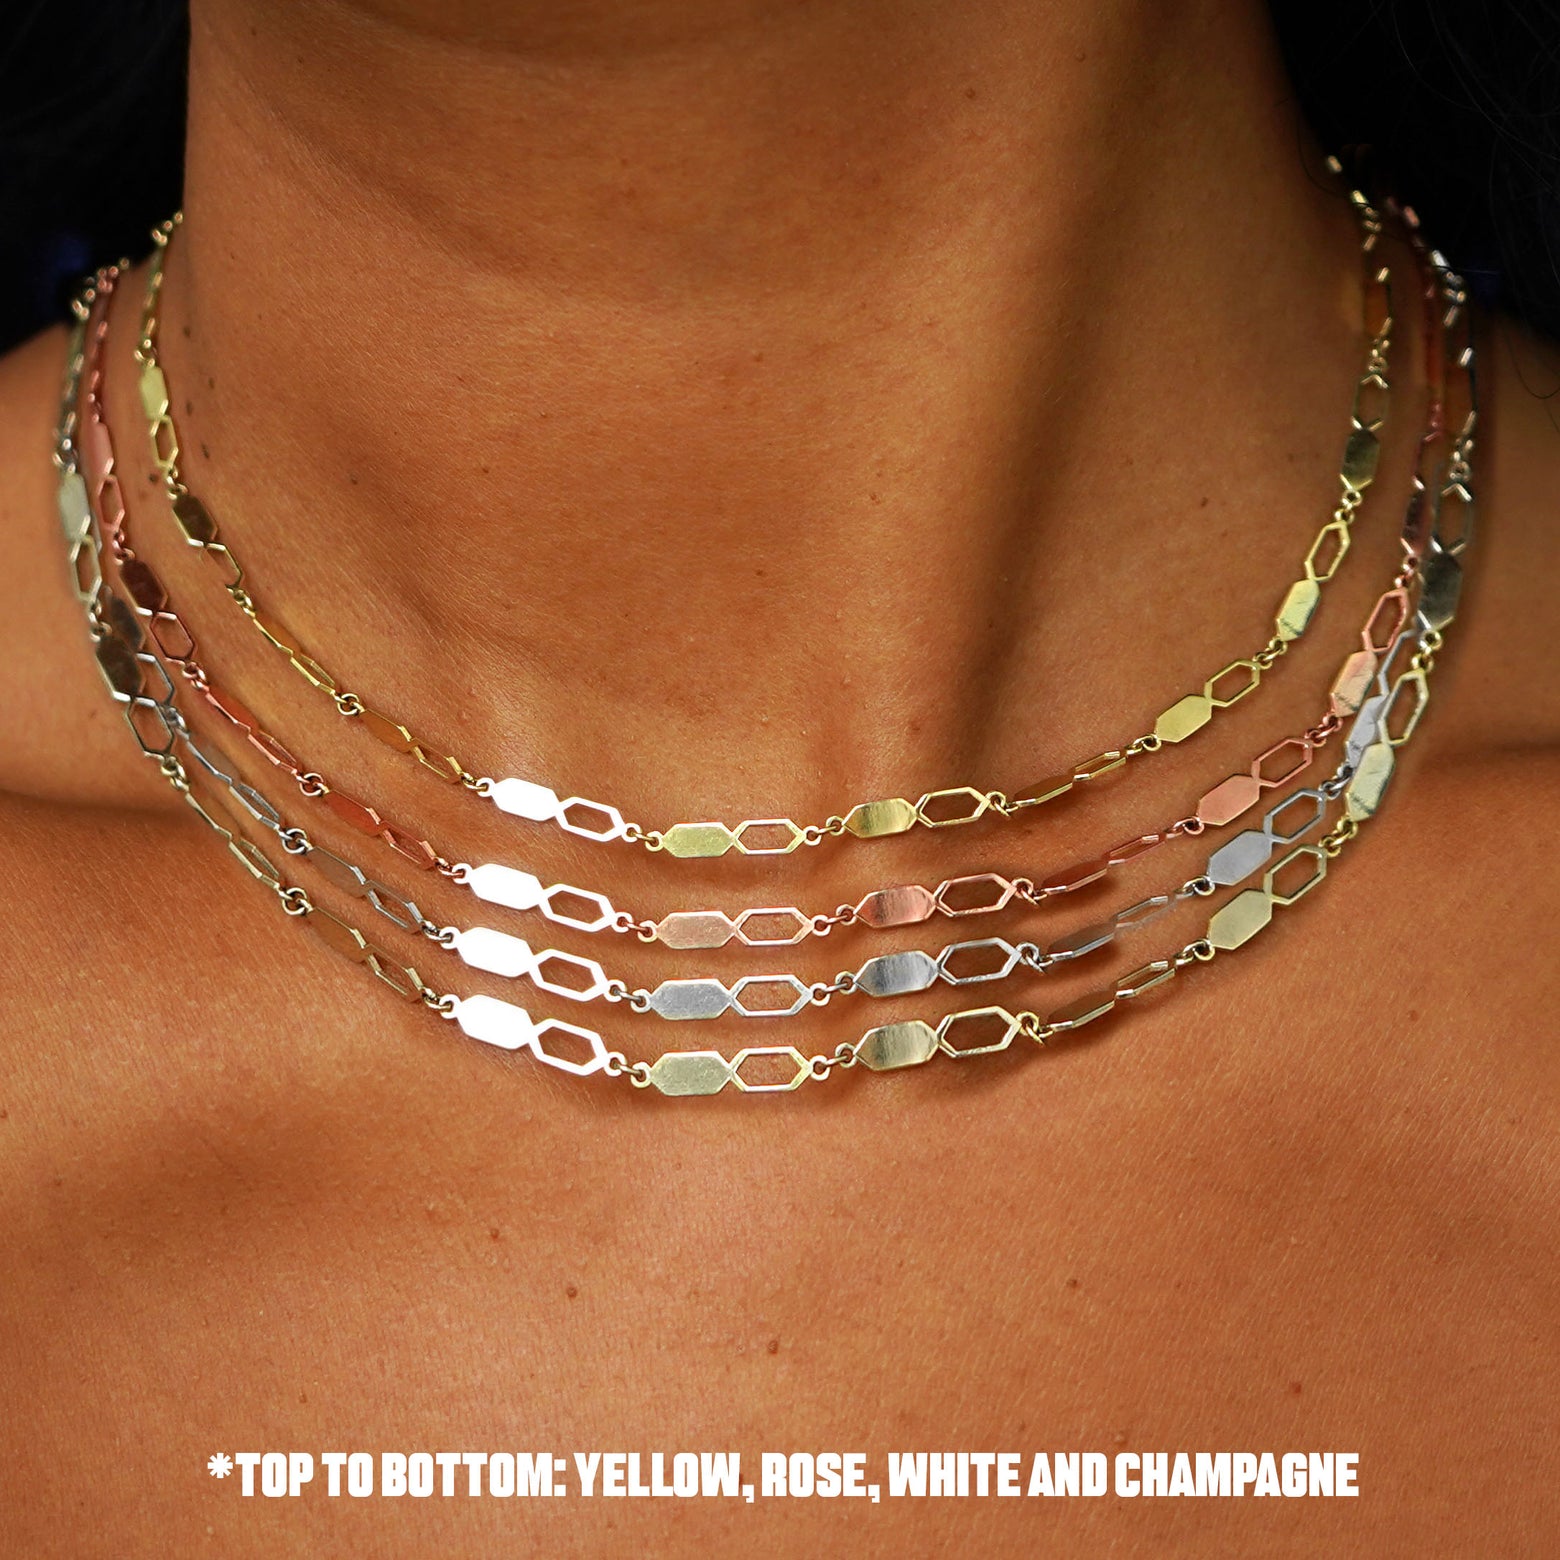 Close up view of a model's neck wearing a four versions of the Tanlah Chain in yellow, rose, white, and champagne gold